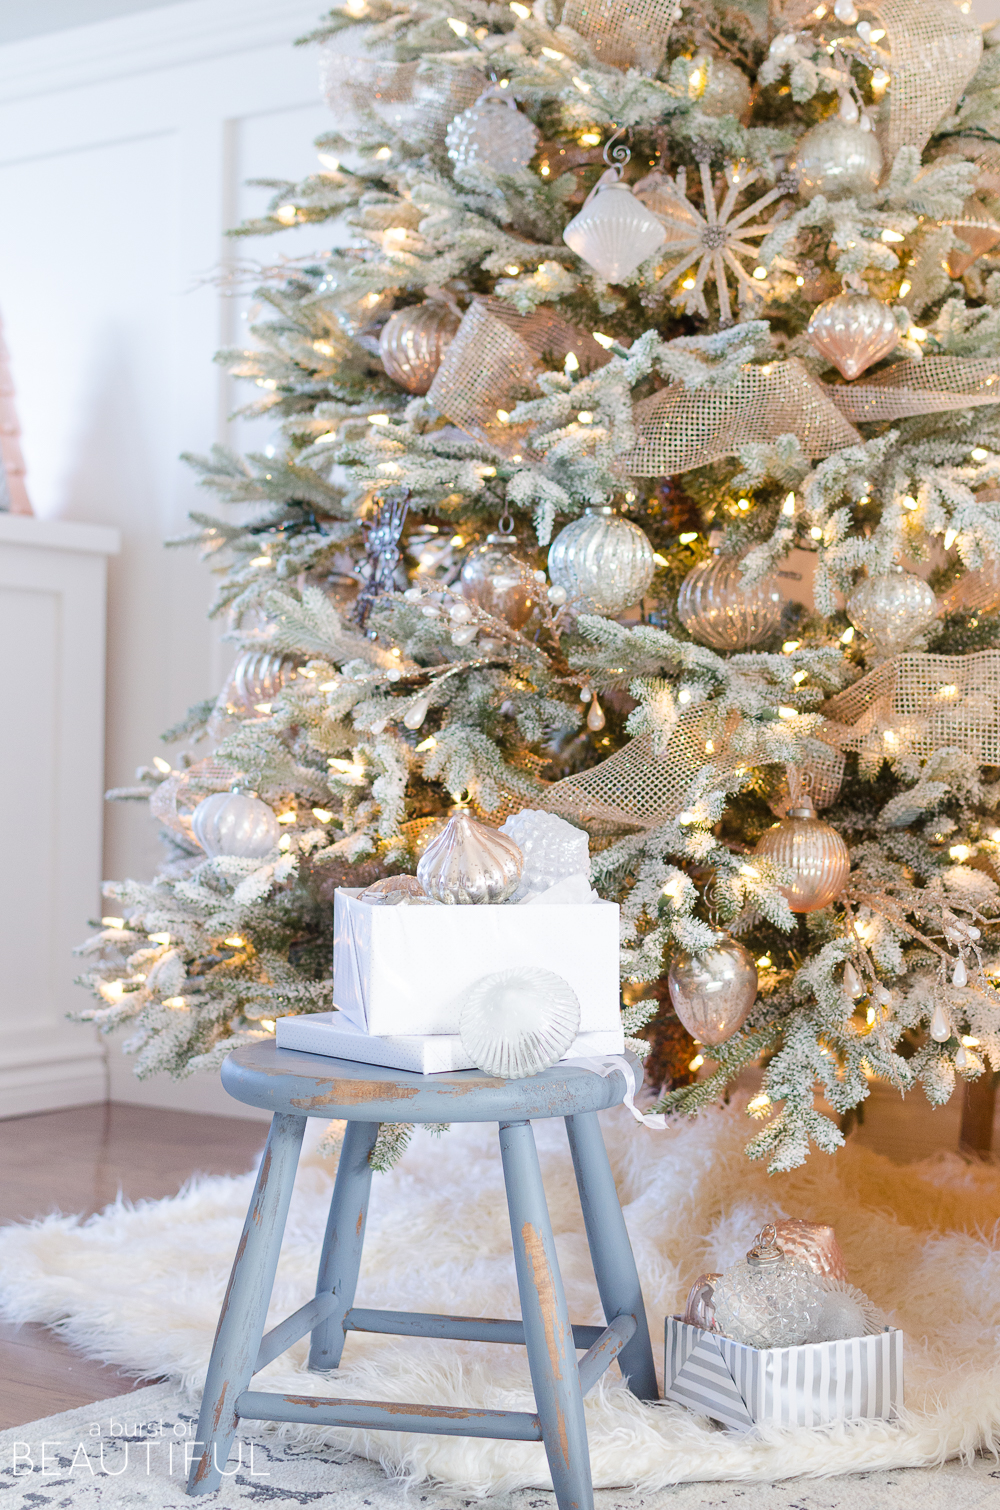 A snowy flocked Christmas tree decorated in silver and rose gold adds a big dose of holiday cheer to this modern farmhouse living room